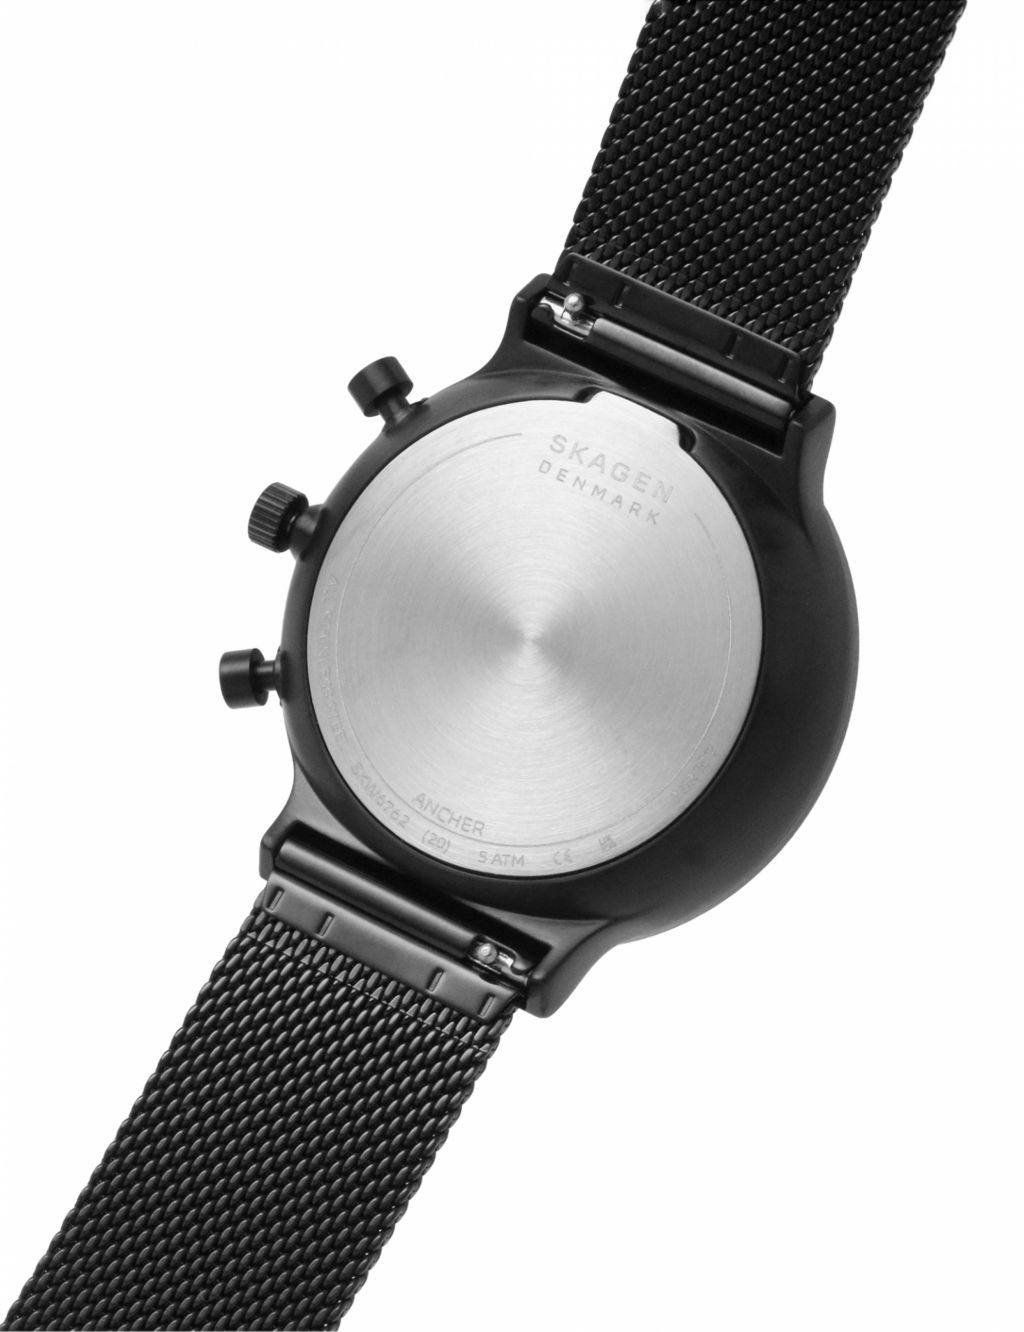 Skagen Anchor Chronograph Black Stainless Steel Watch image 4